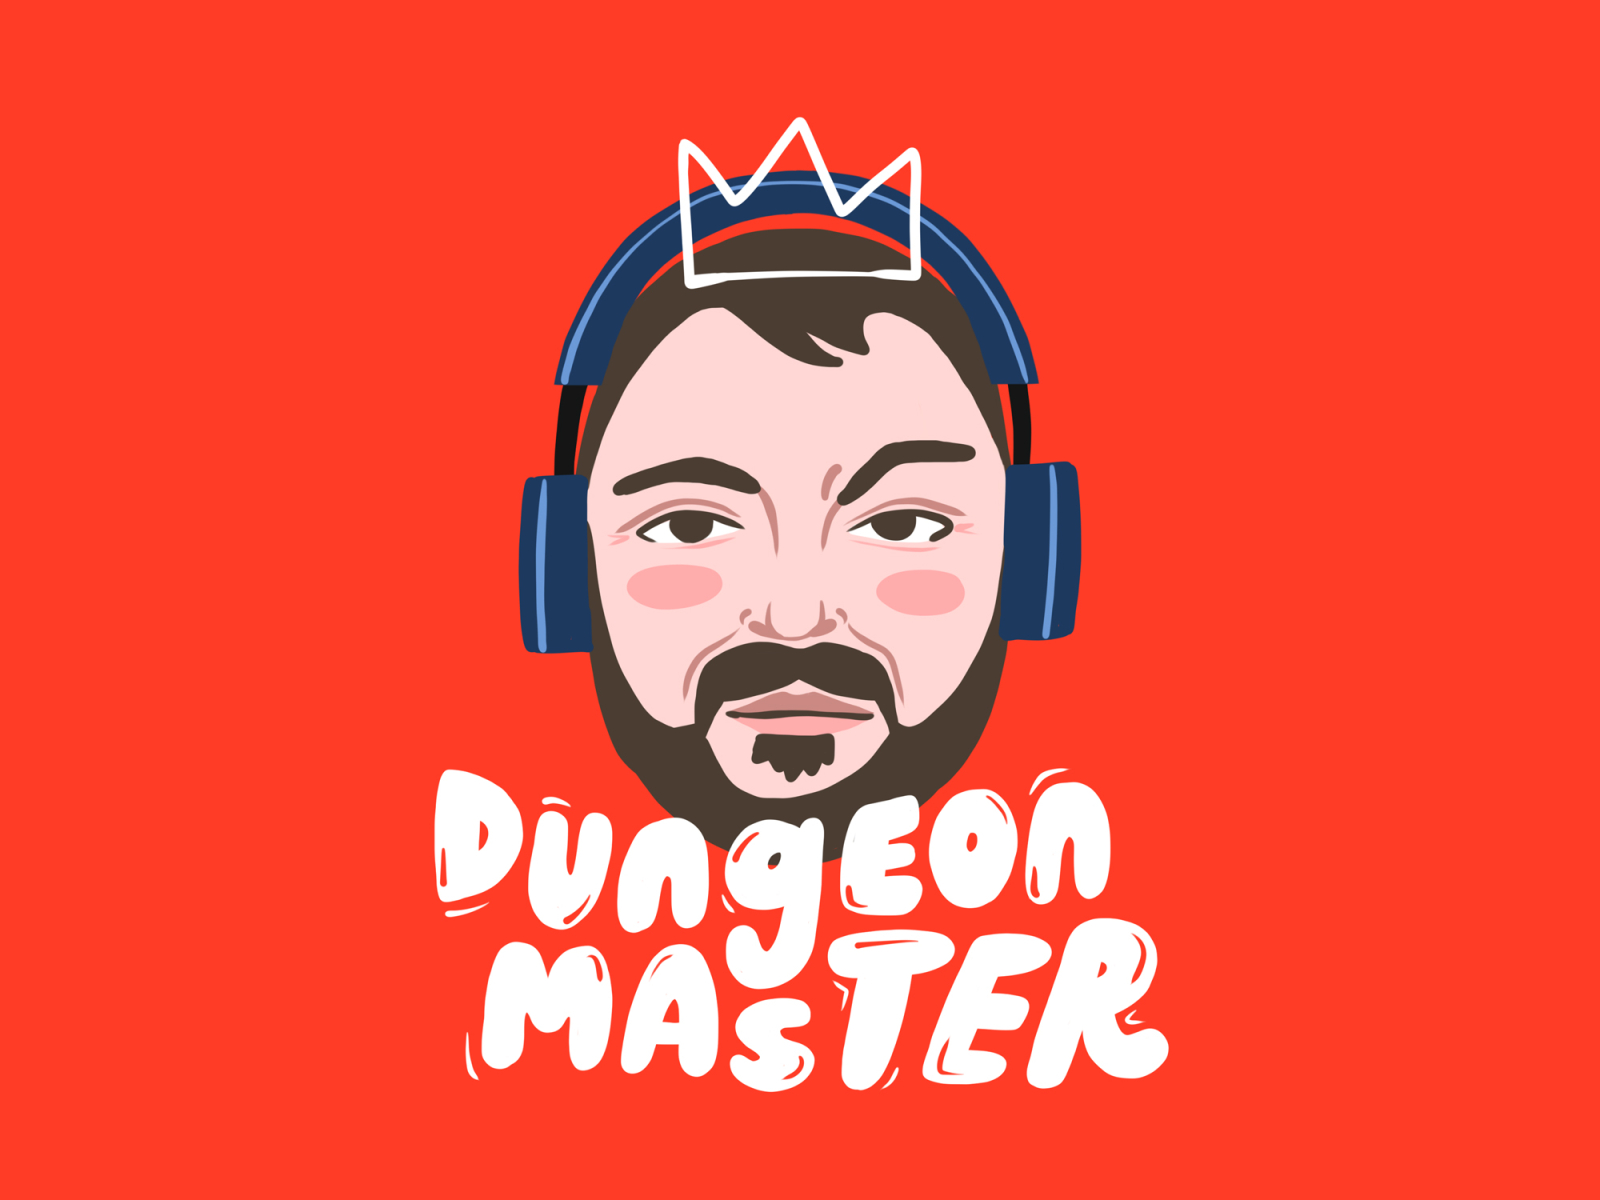 Dungeon Master Ben bubble type type crown portrait illustration dungeon dungeons and dragons